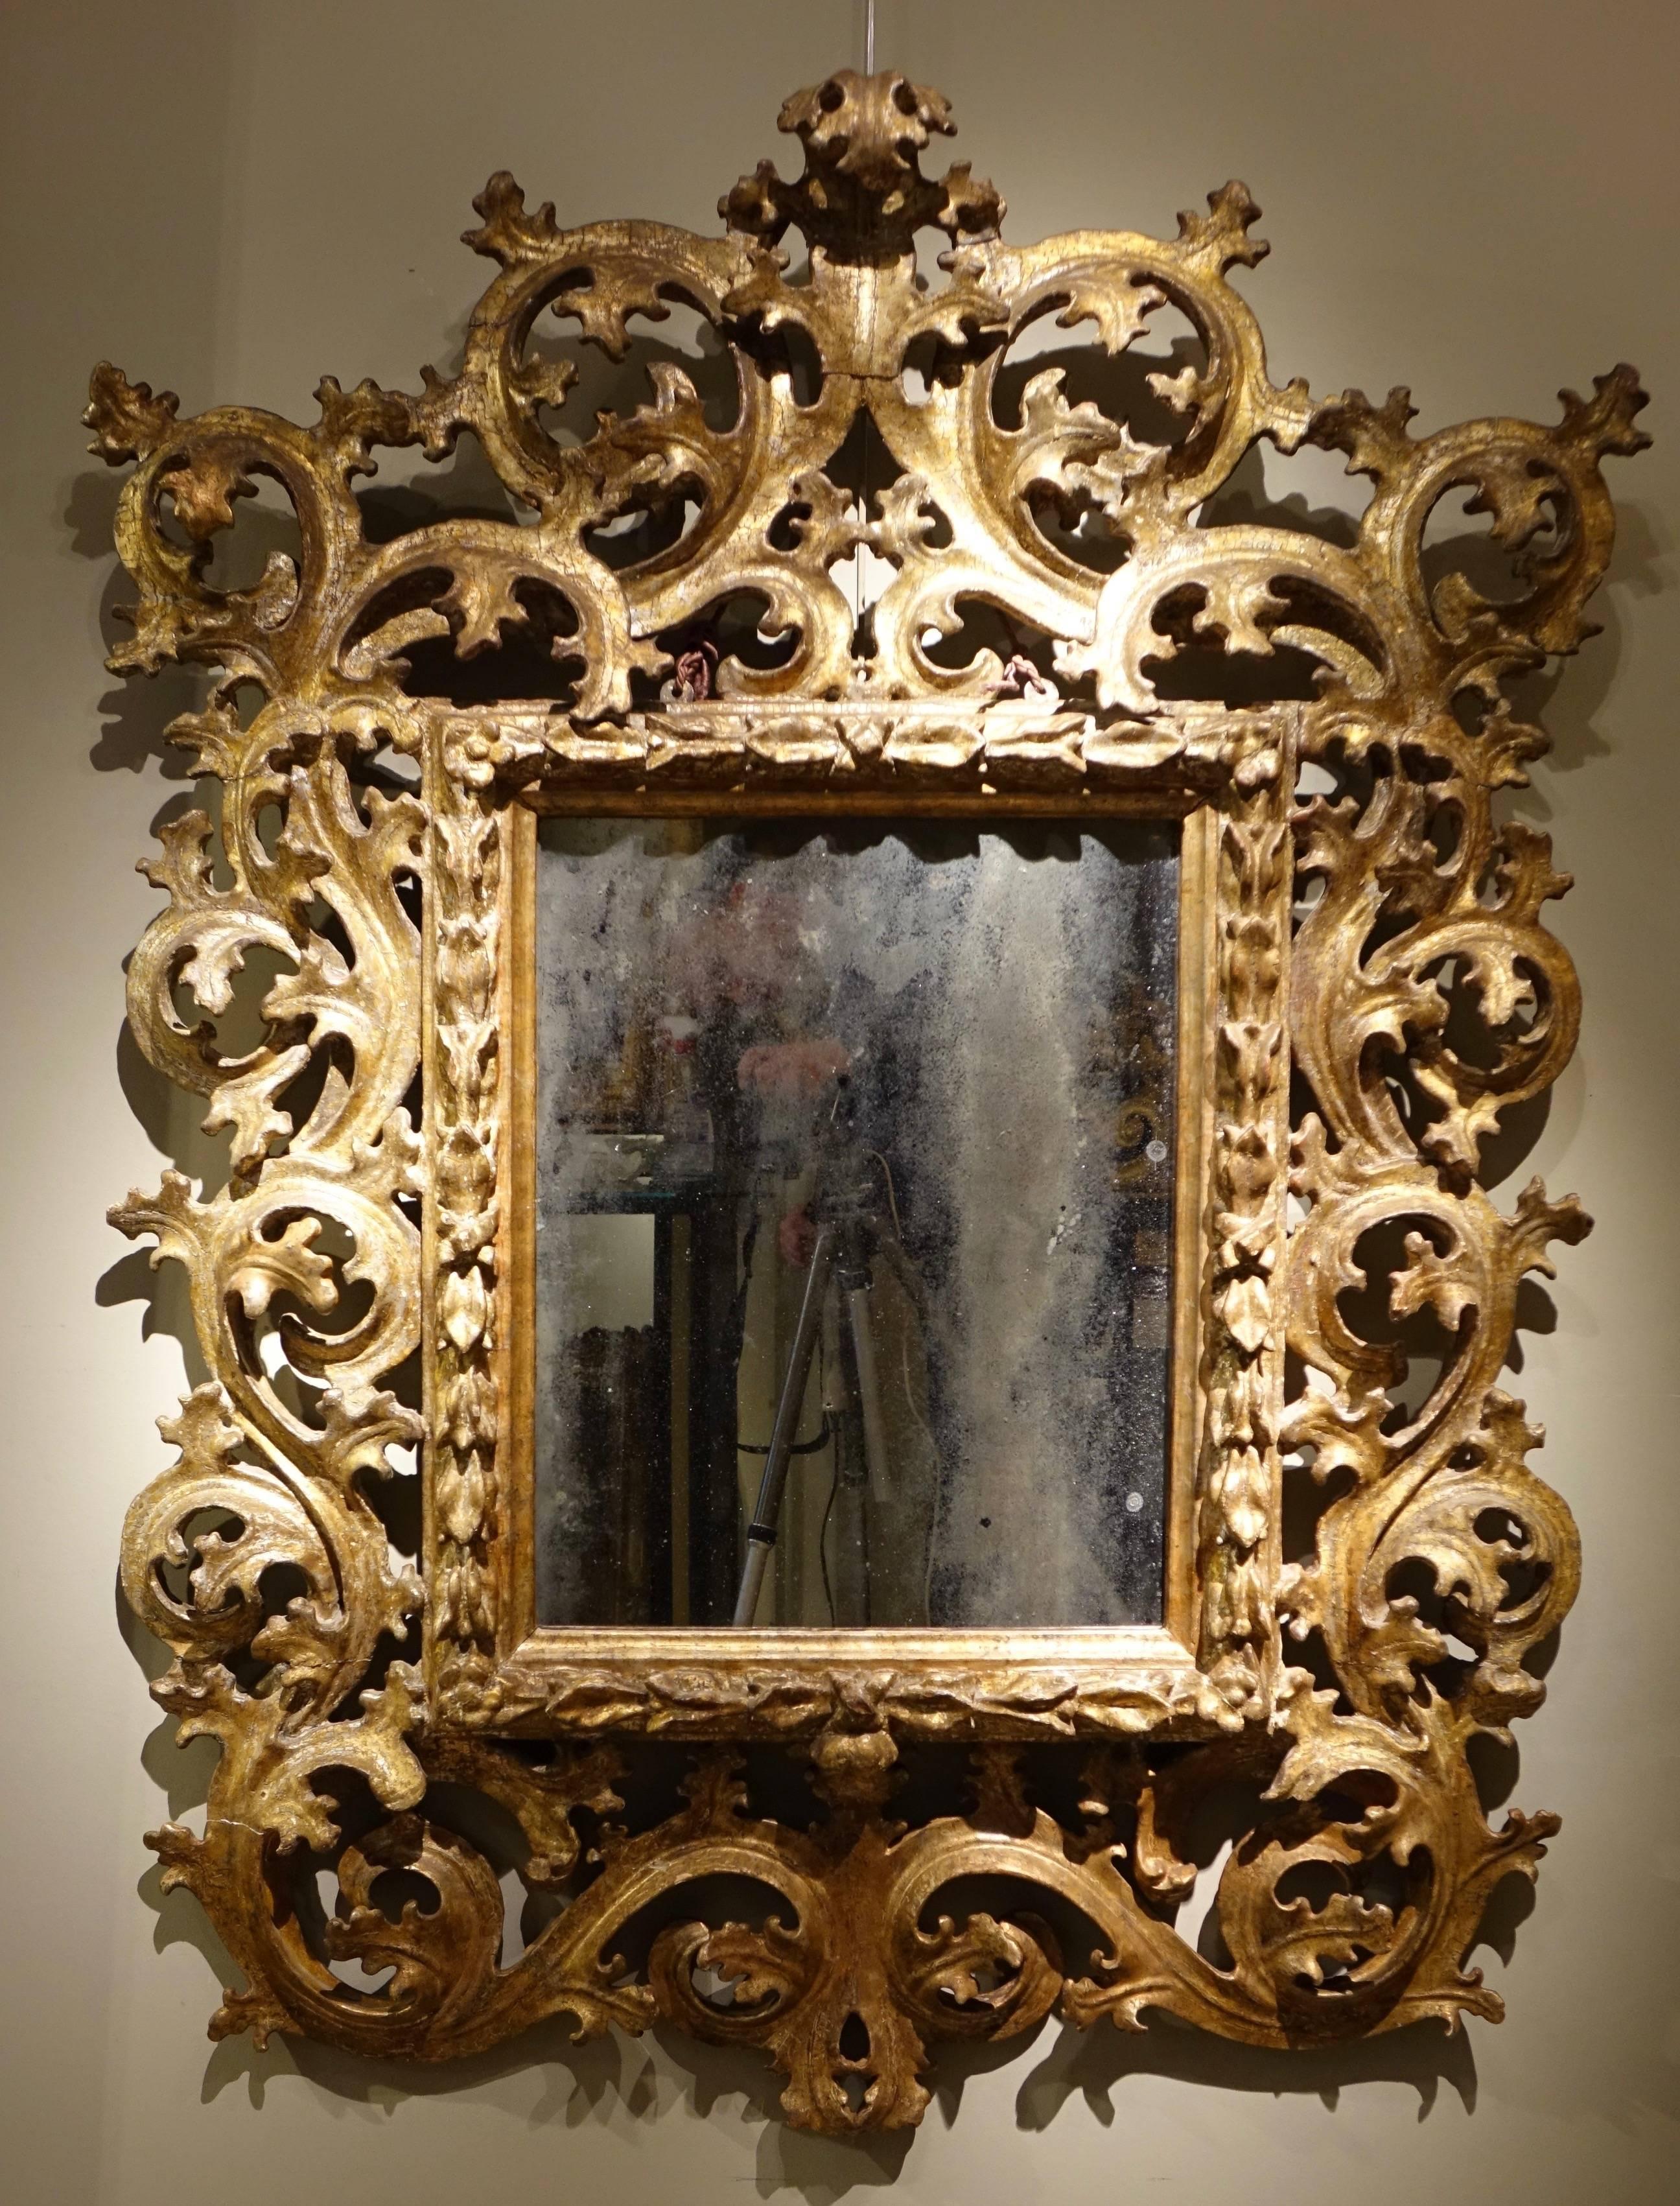 Baroque mirror richly carved with foliage scrolls, mecca giltwood 
Mercury center mirror 
Naples or Kingdom of Sicily, late 17th-early 18th century.
Wear and tear, restorations, back not parqueted.